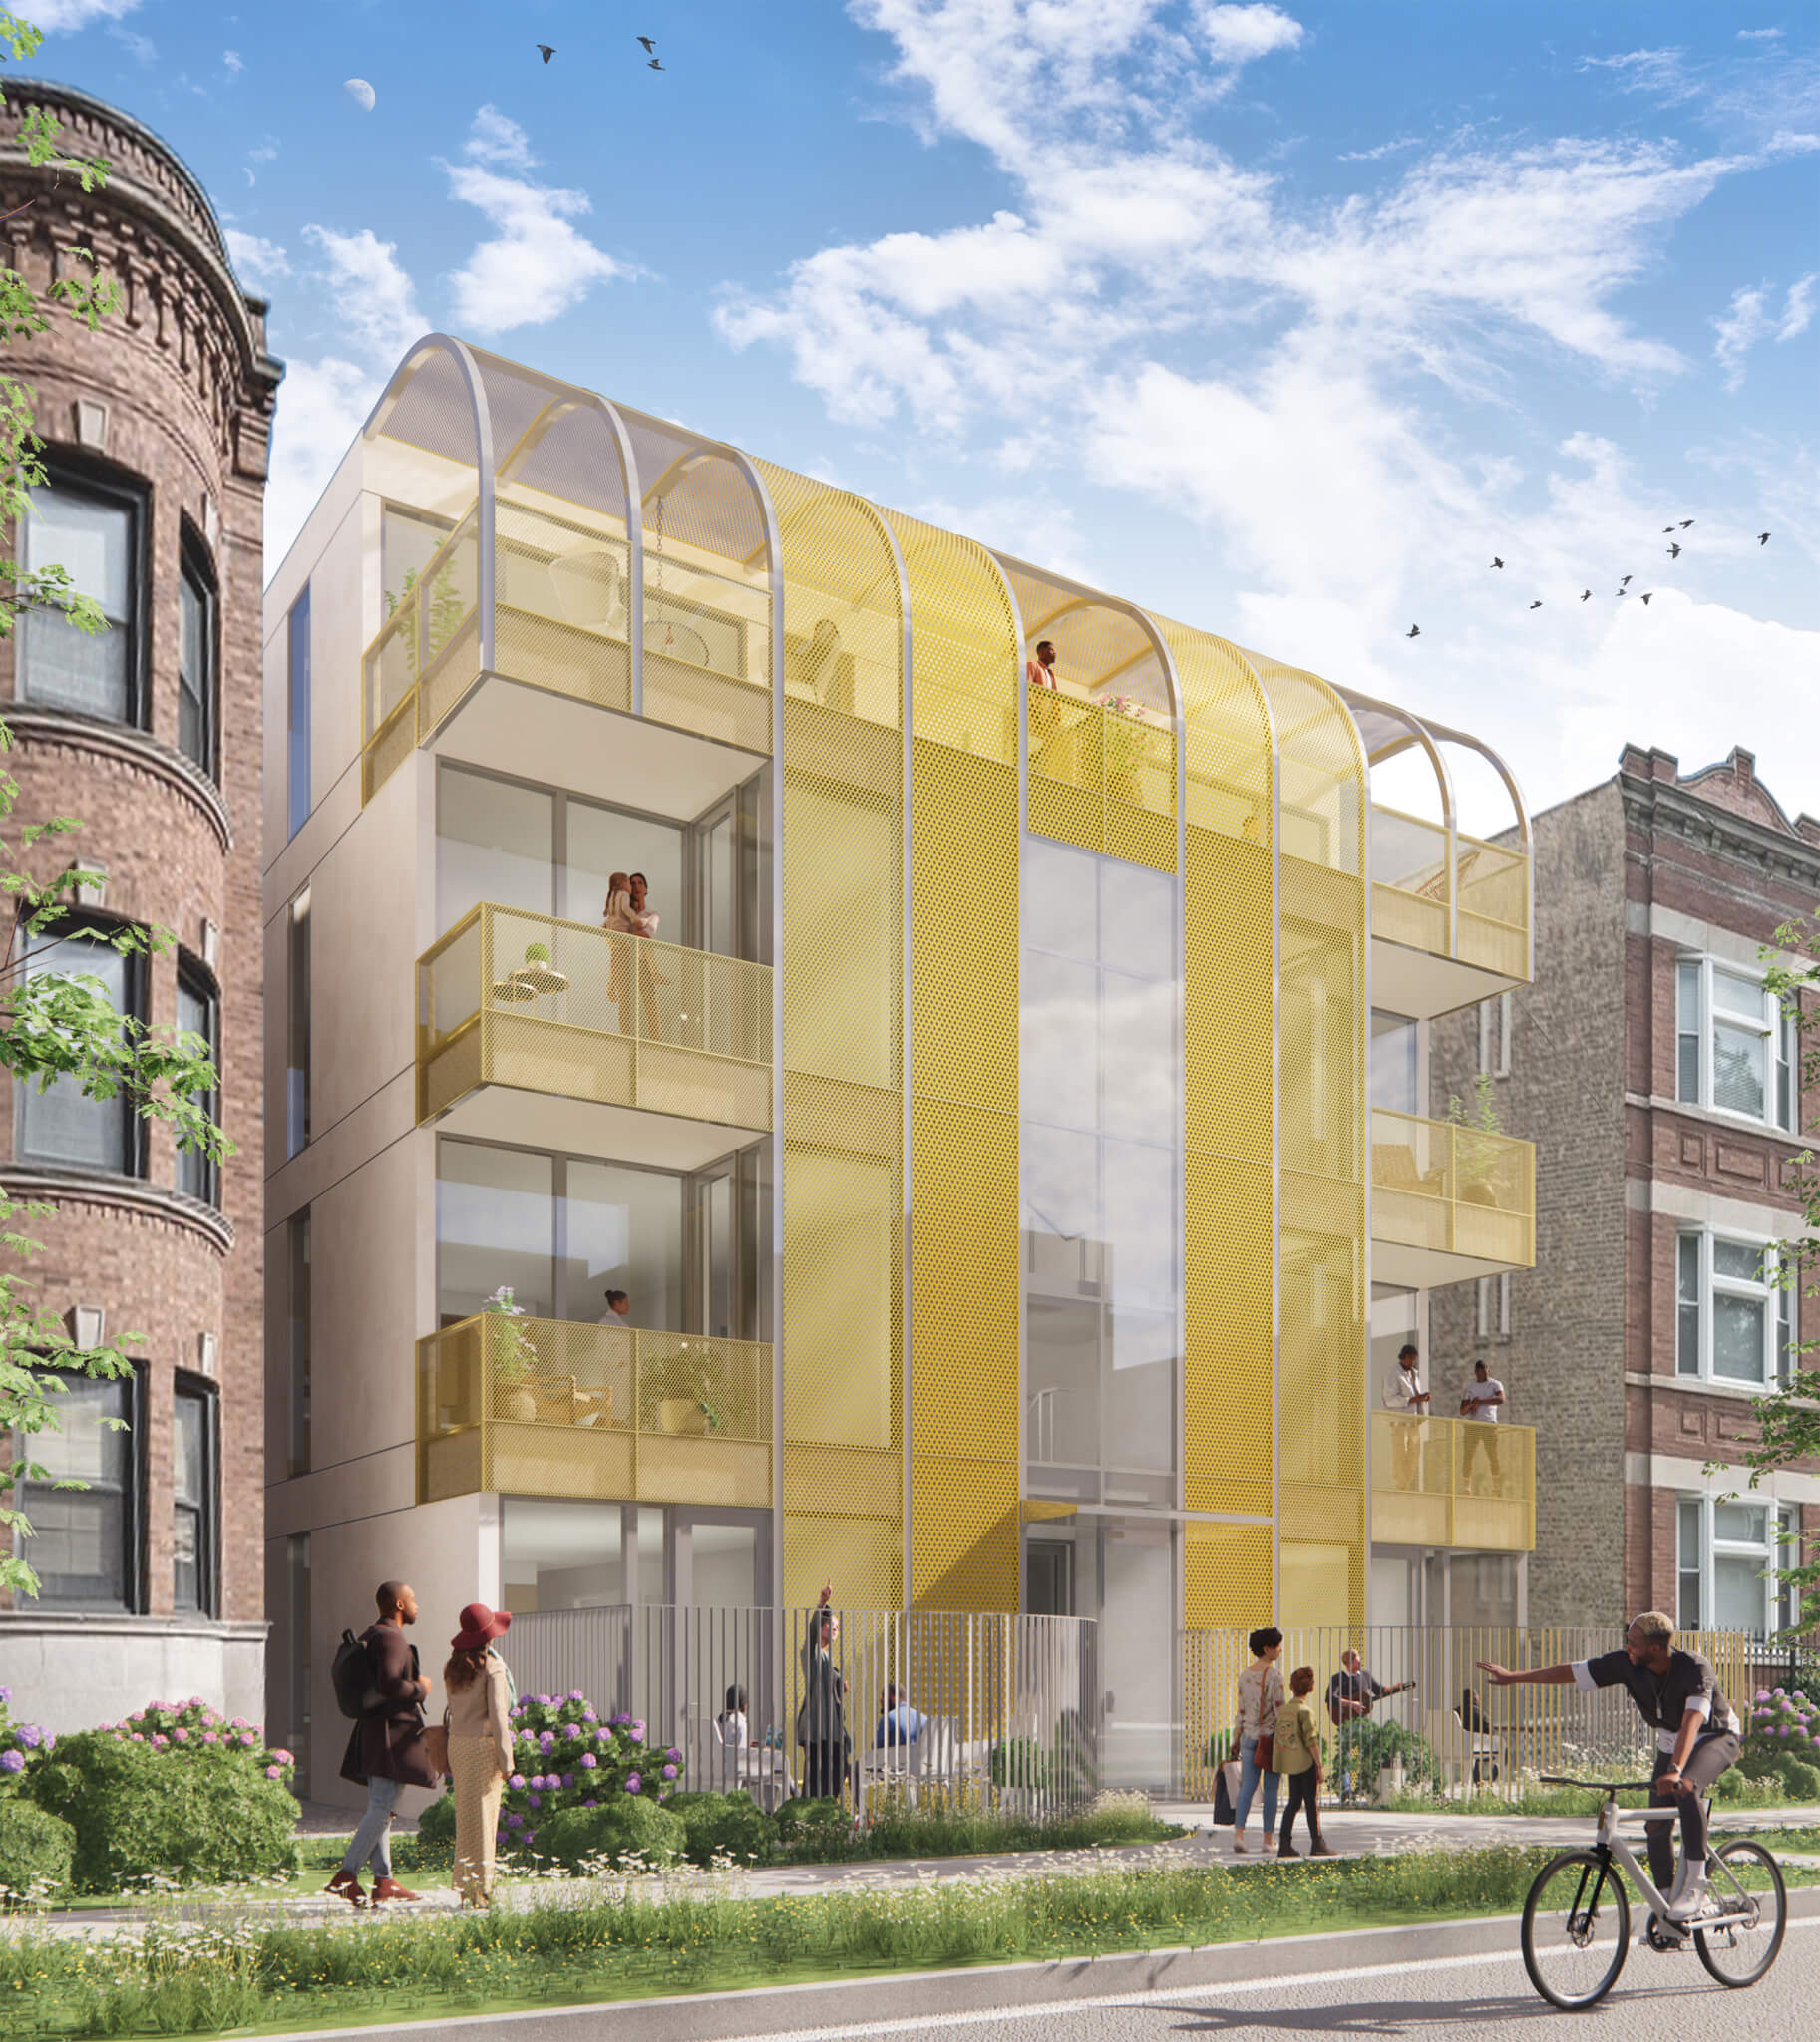 Finalists announced for a housing ideas competition in Chicago